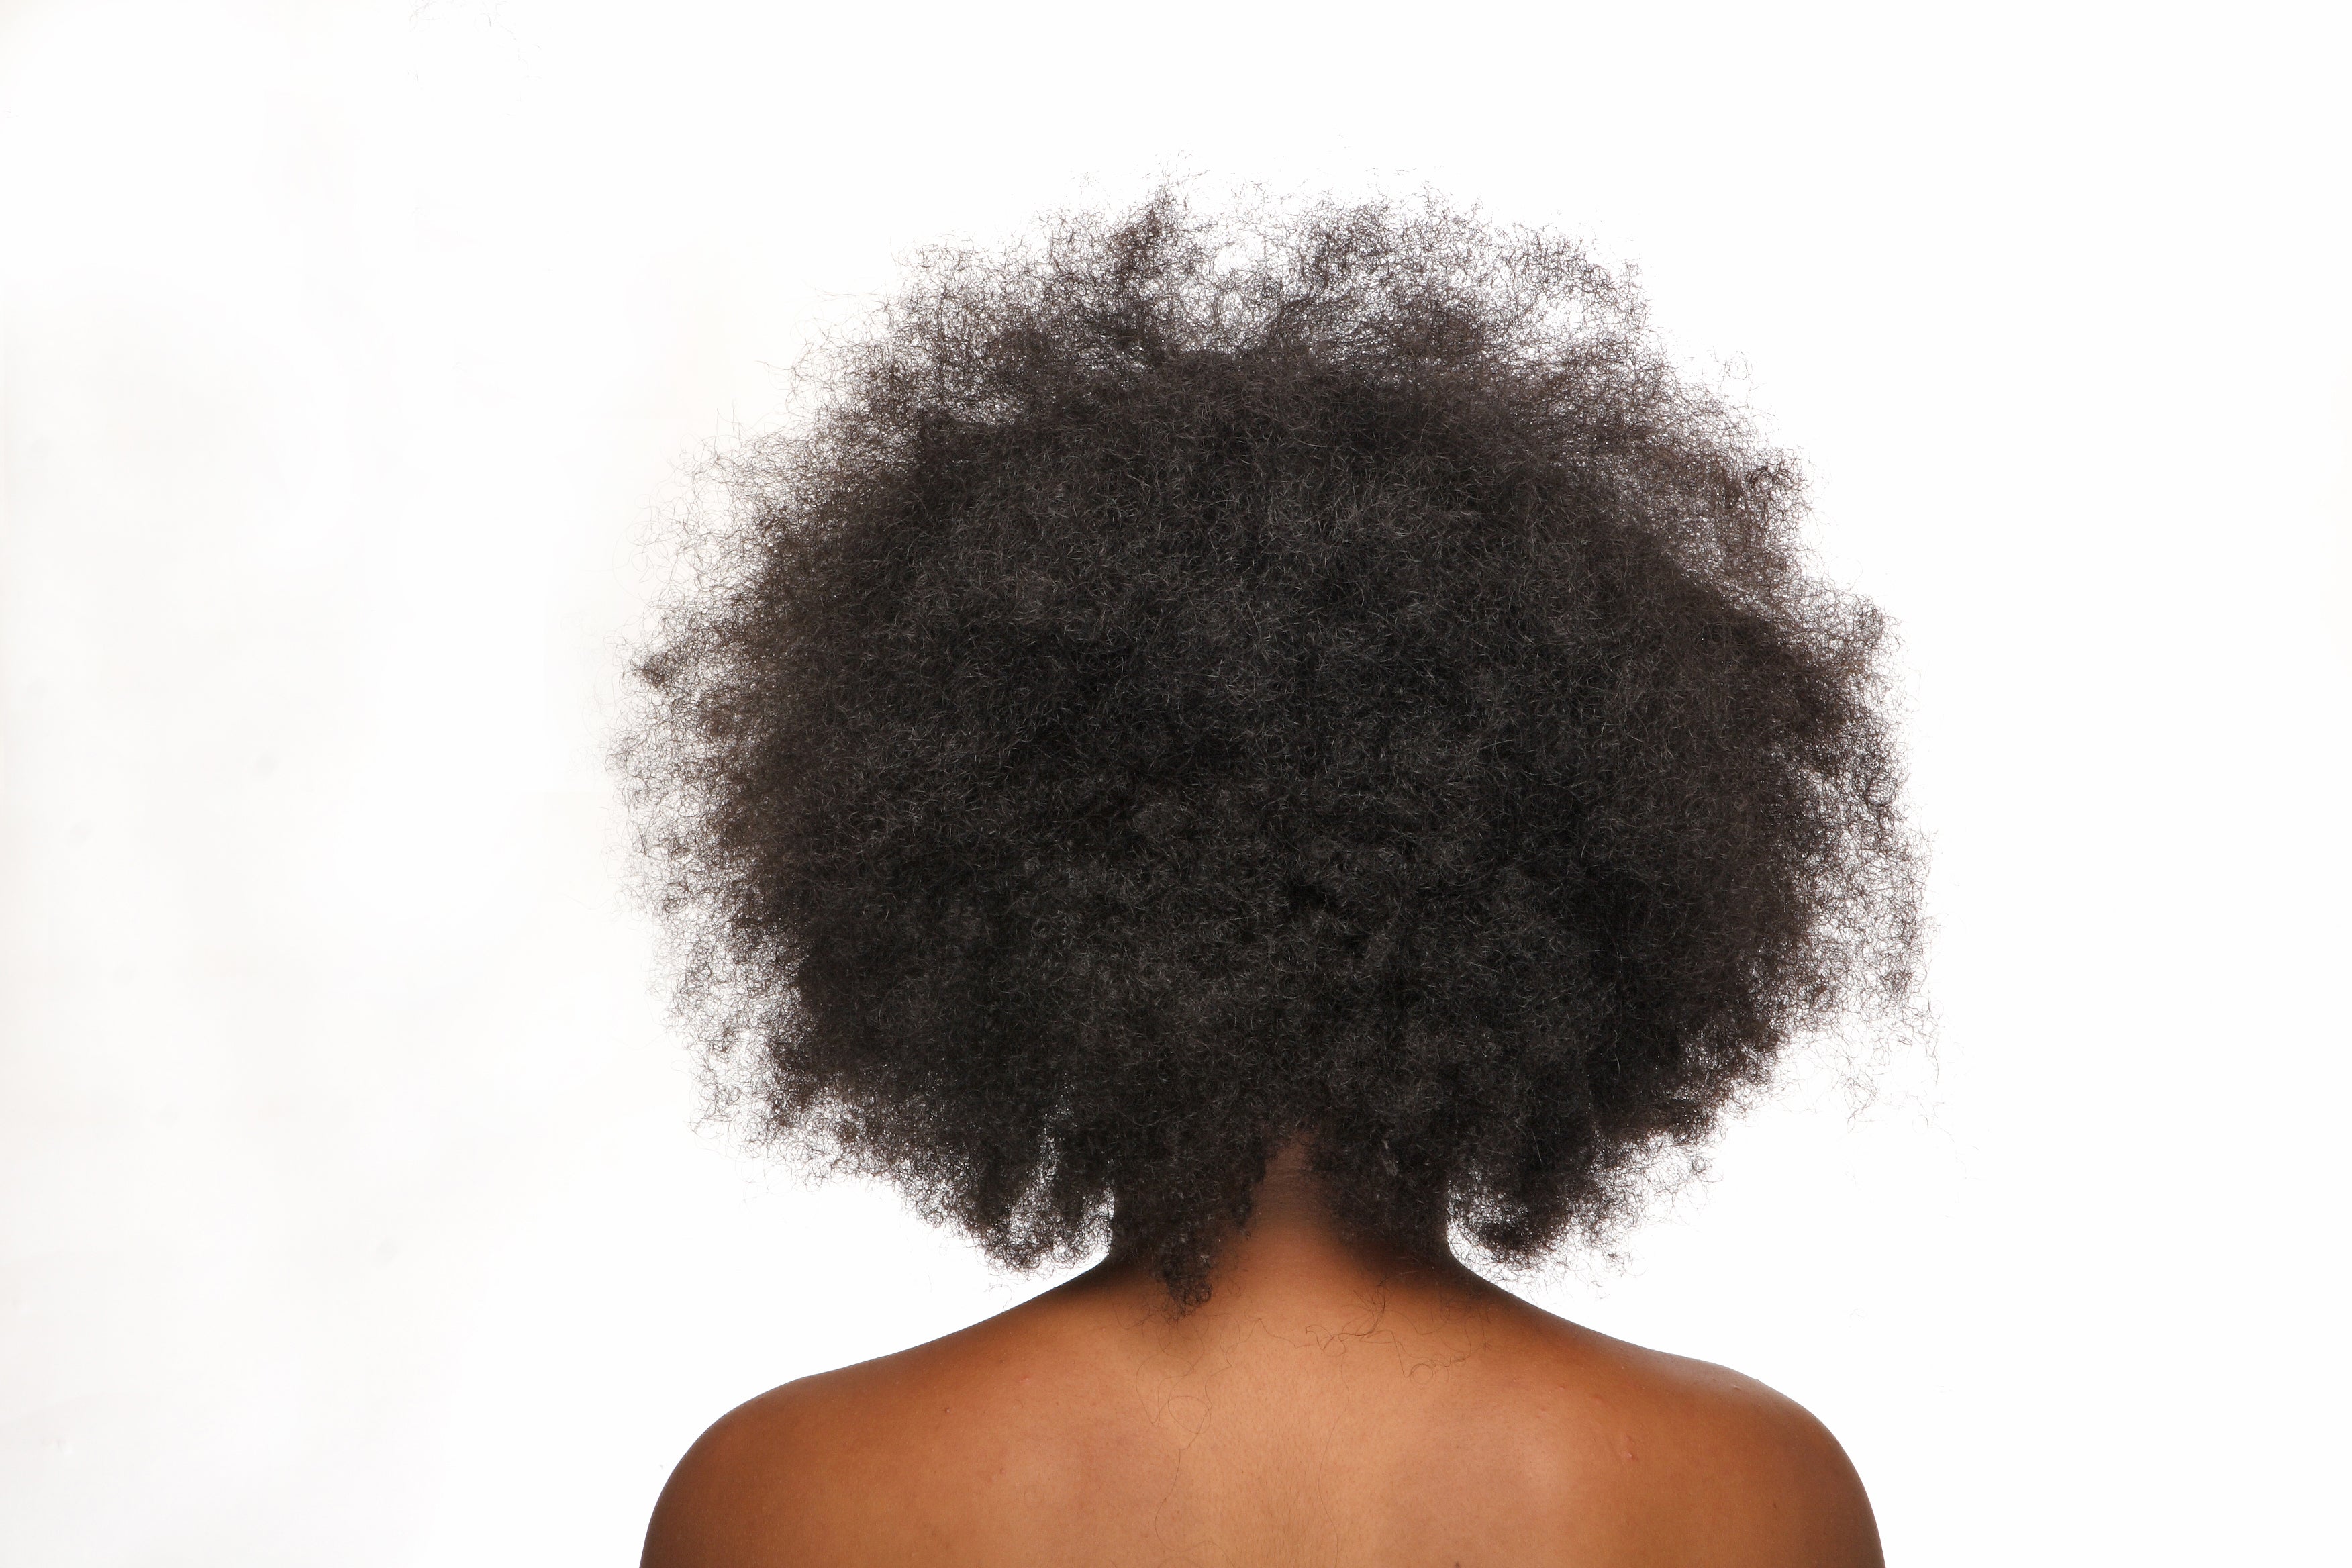 The Attacks On Our Natural Hair Keep Happening, Here's What We Can Do